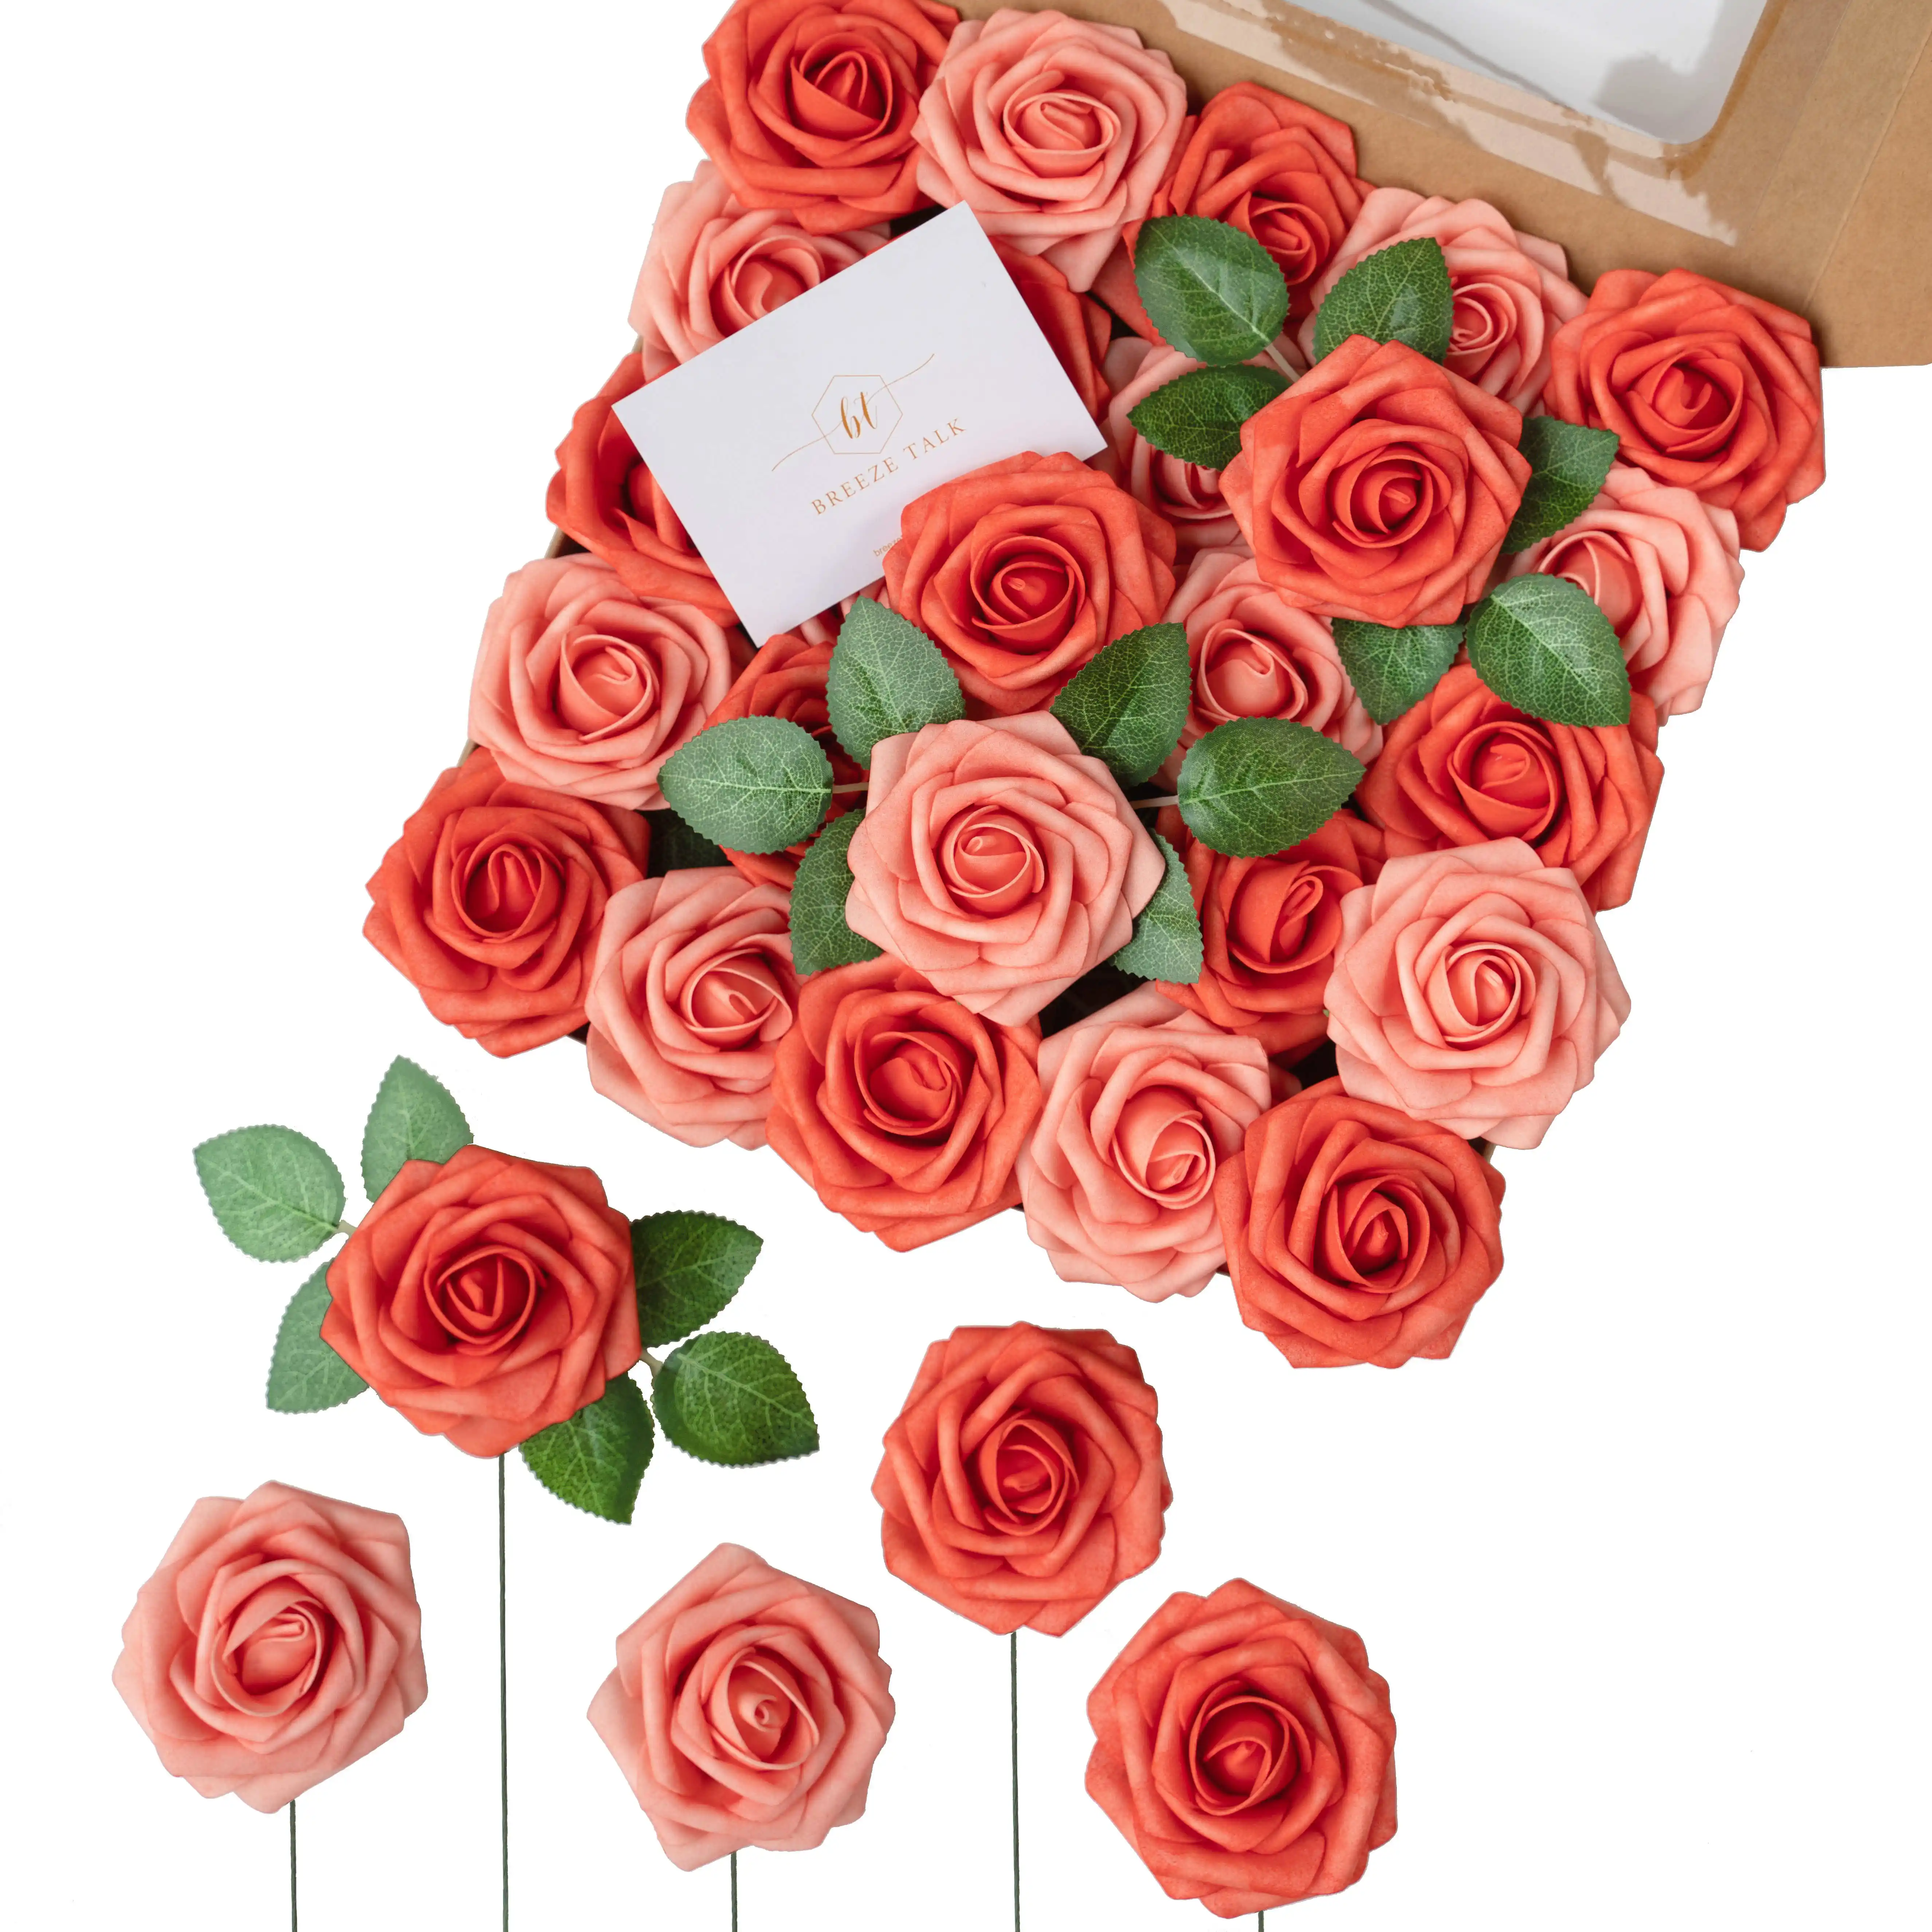 roses artificial flowers Artificial Wedding Flowers Mixed Living Coral Shades Real Looking Roses Stem for DIY Wedding Bouquets